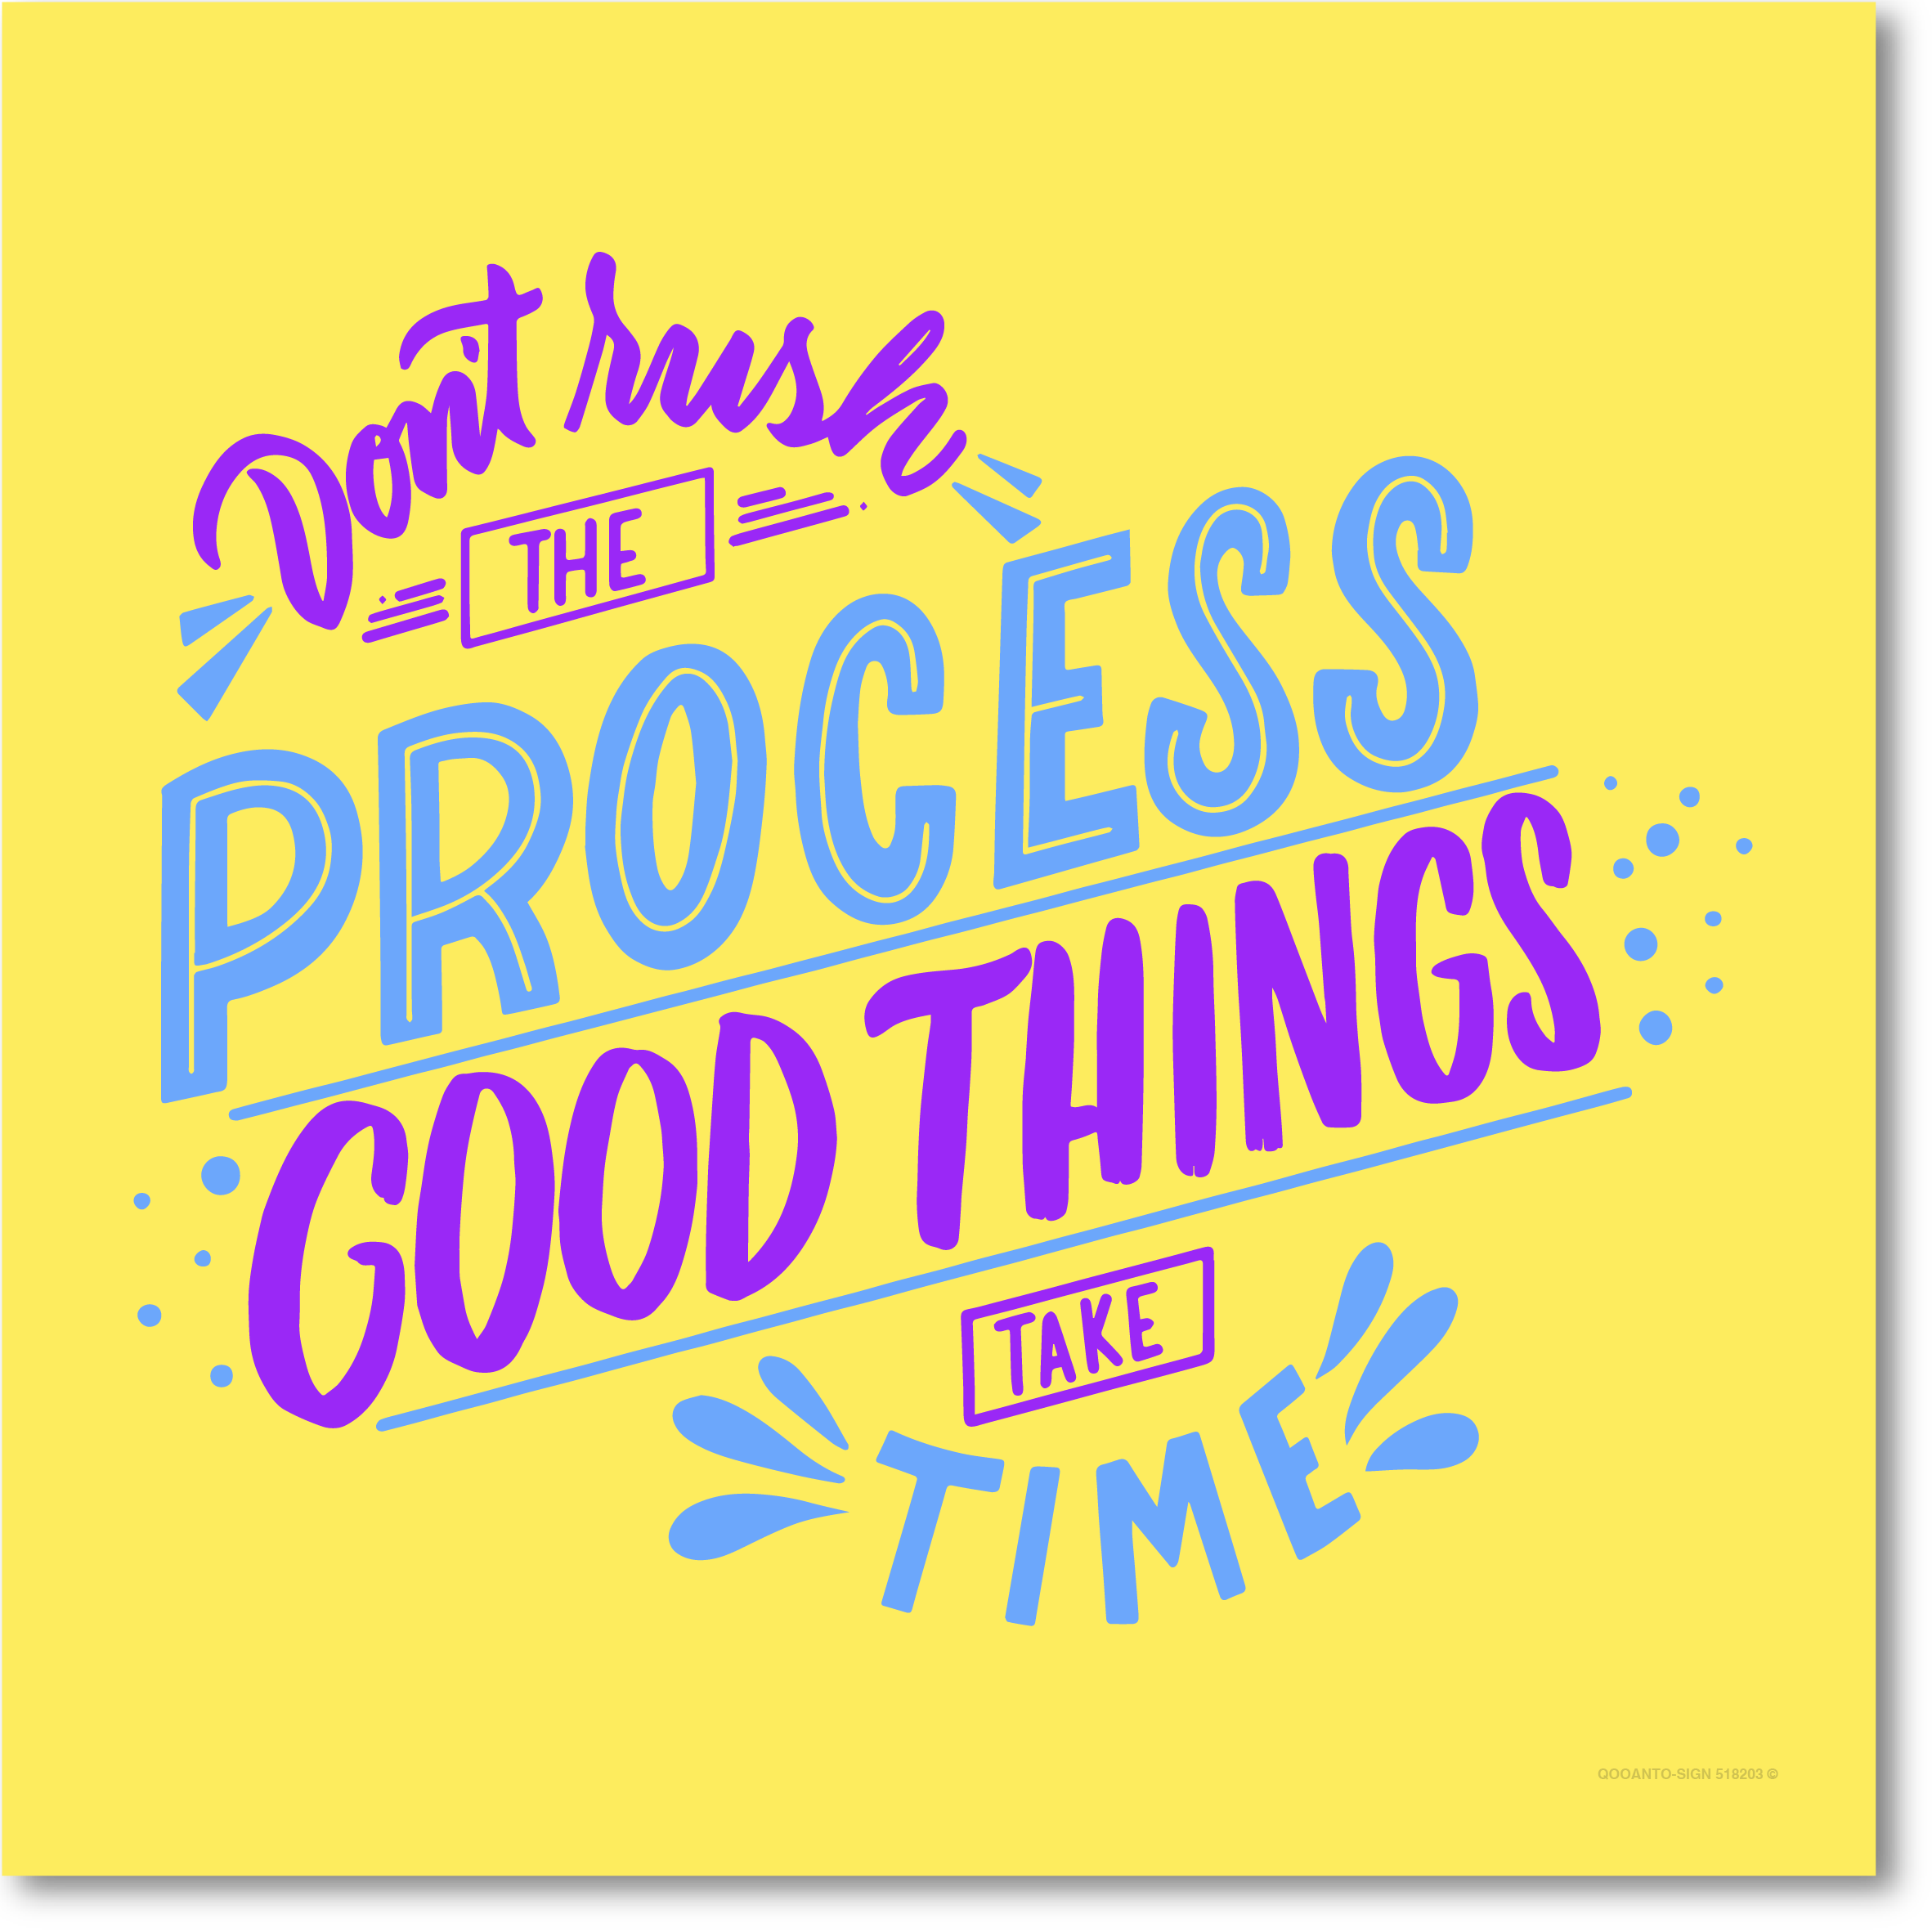 Don't rush the process - Good things take time, Schild oder Aufkleber